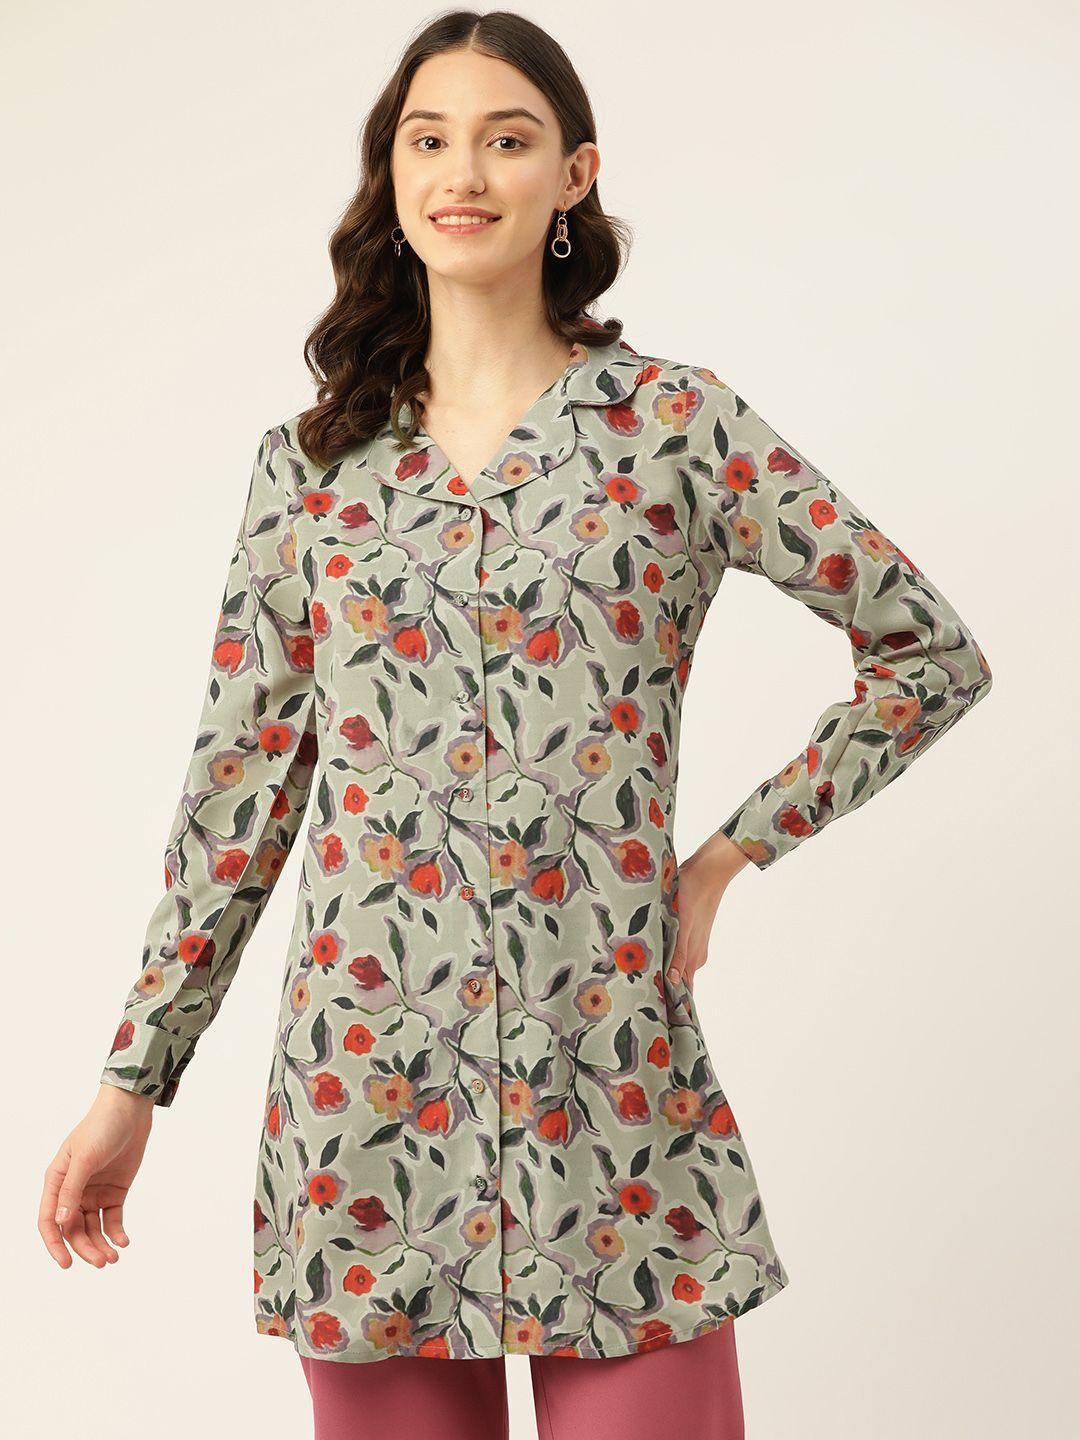 rue-collection-floral-print-crepe-shirt-style-longline-top